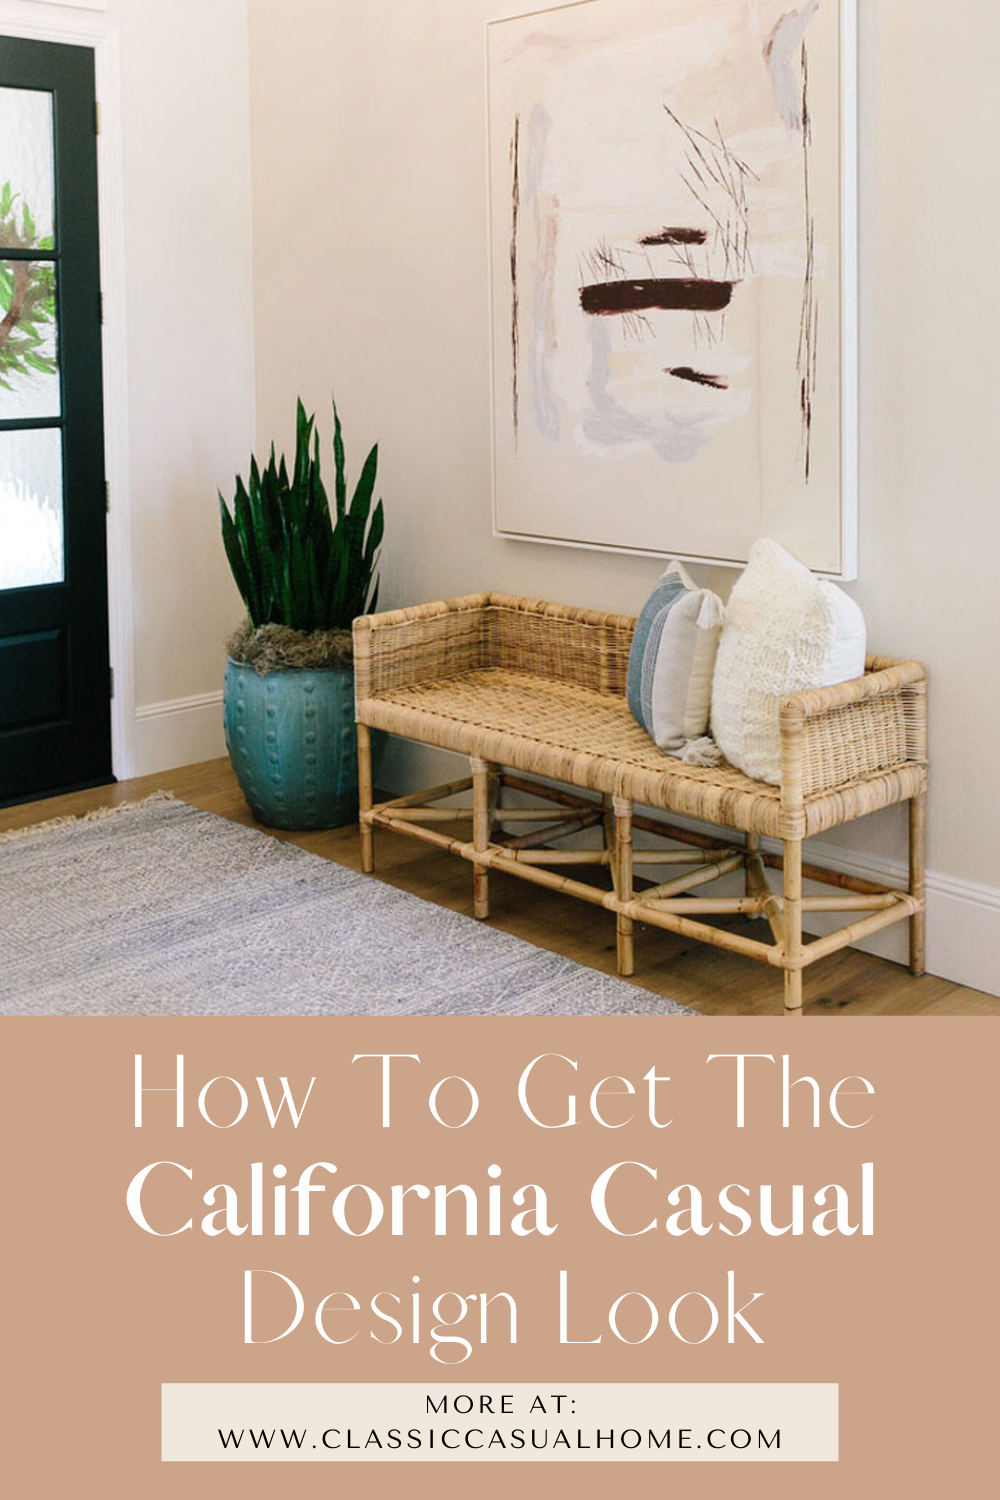 How to get the California Casual Look with a rattan bench in the foyer